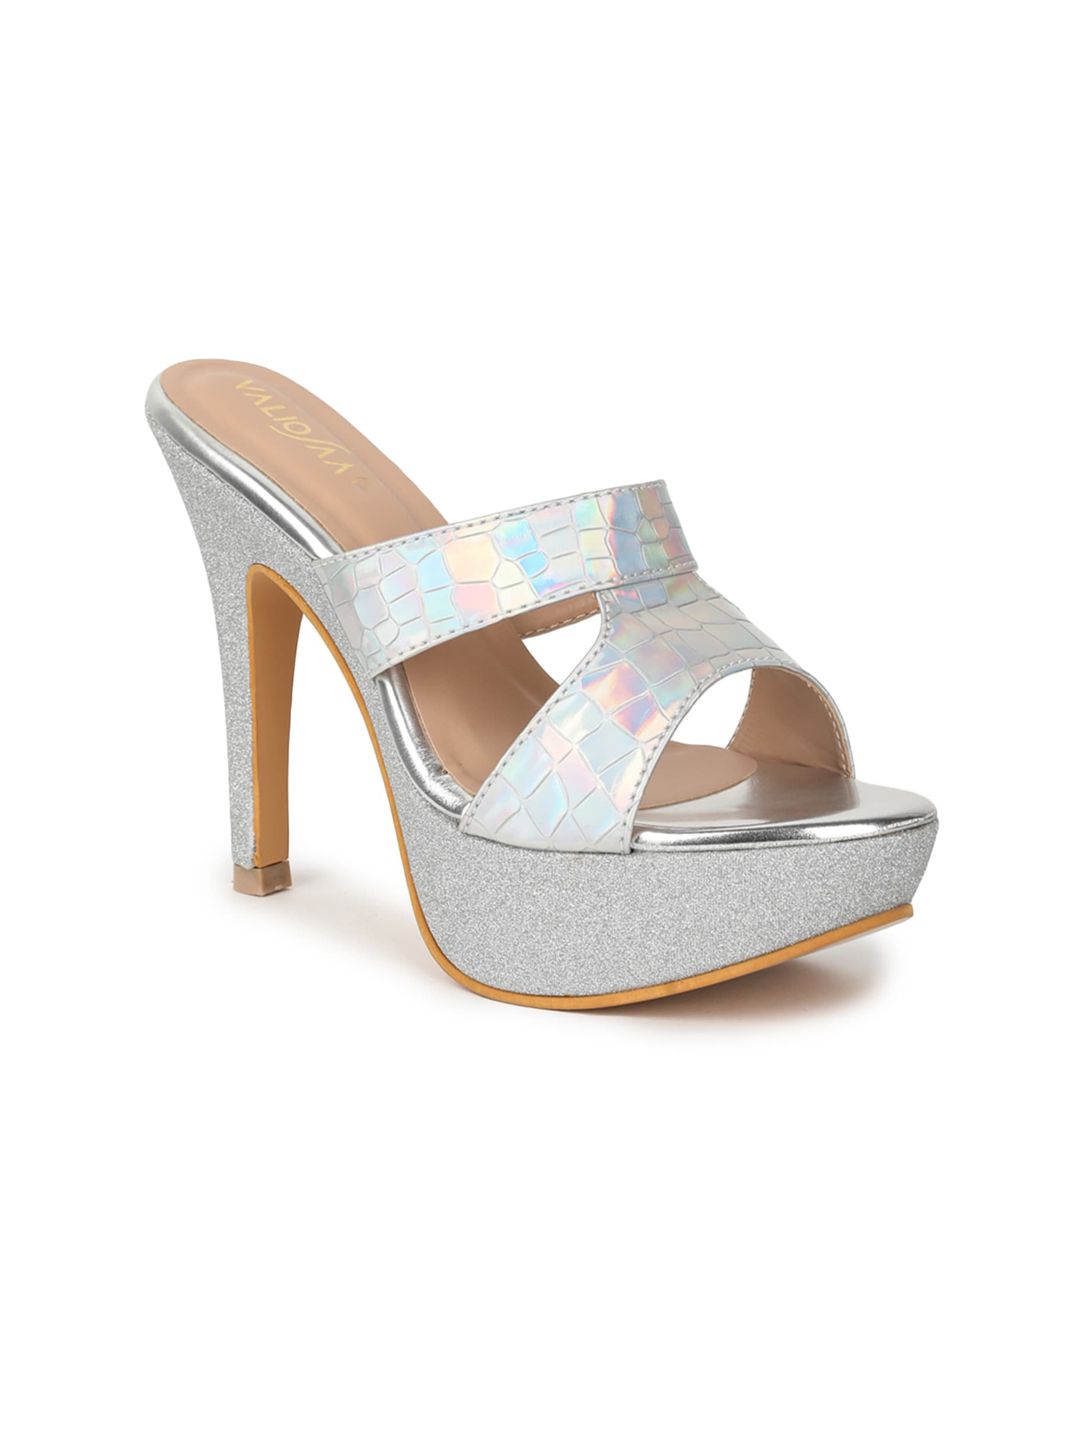 VALIOSAA Silver-Toned Textured Party Stiletto Sandals 5 Inch Heels Price in India